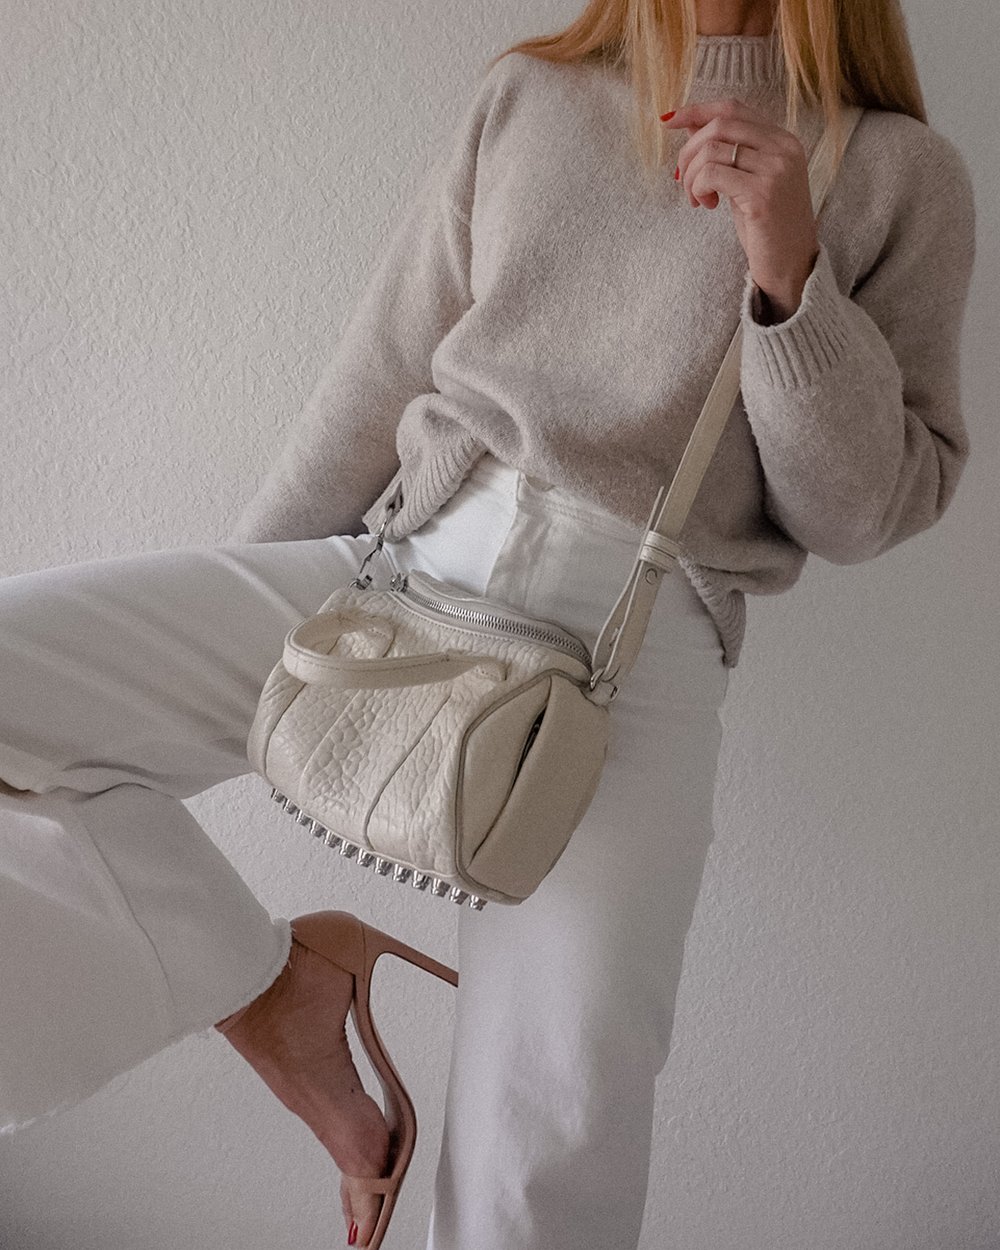  hellojessicashley wearing ZARA ecru high waist pants, Nordstrom sweater with Alexander Wang Rockie handbag, showing how to style beige off-white pants for a classic look 